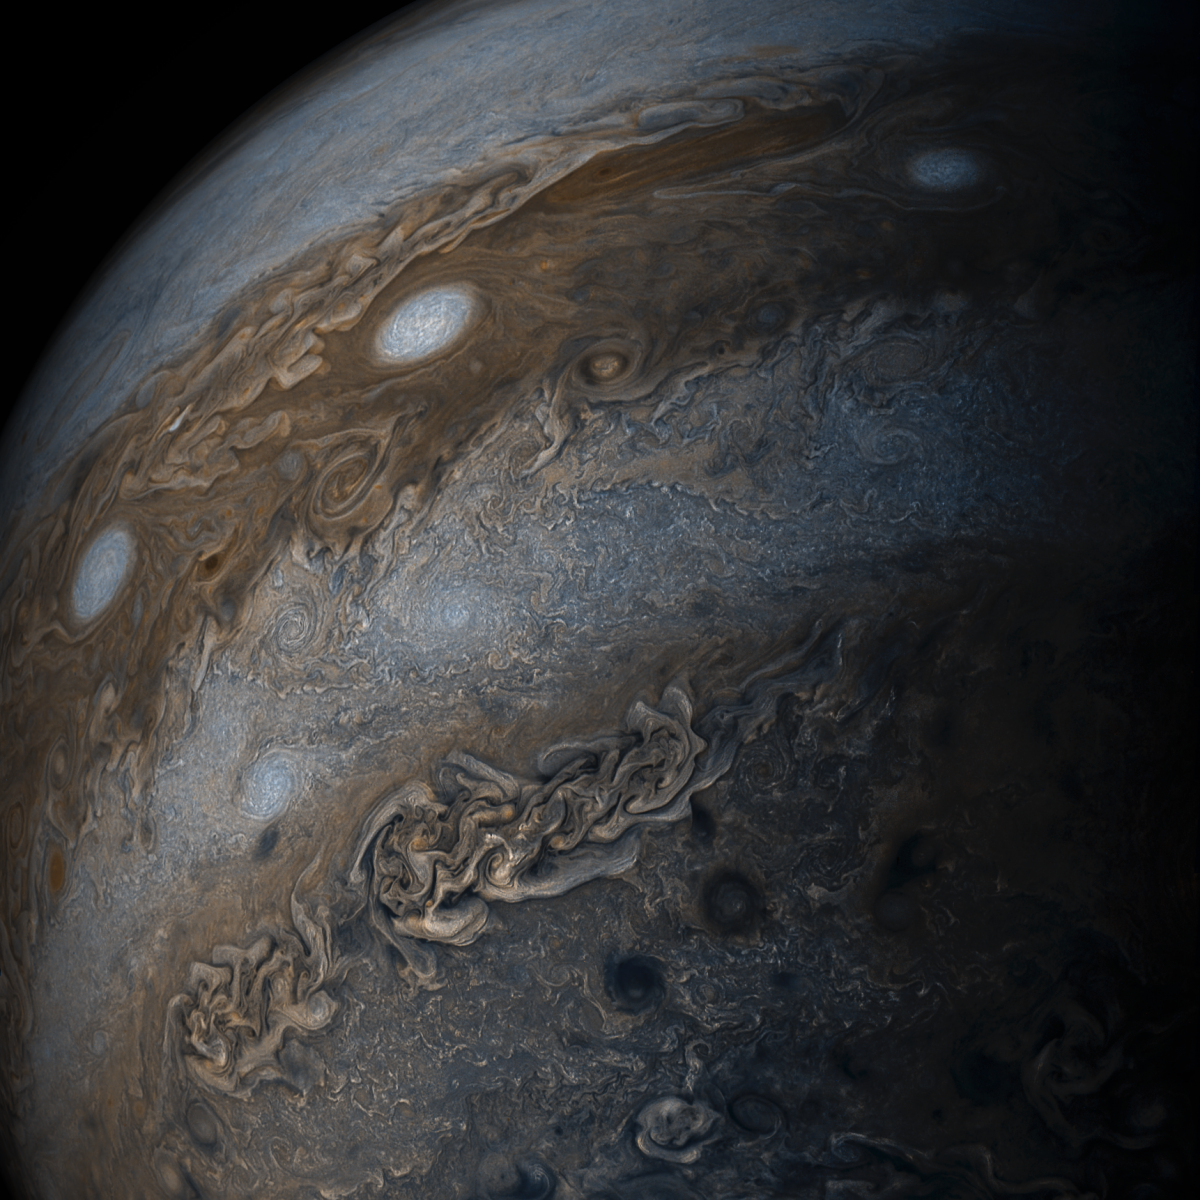 Another stunner from the Juno spacecraft: Jupiter's giant cloud bands and 'String of Pearls'